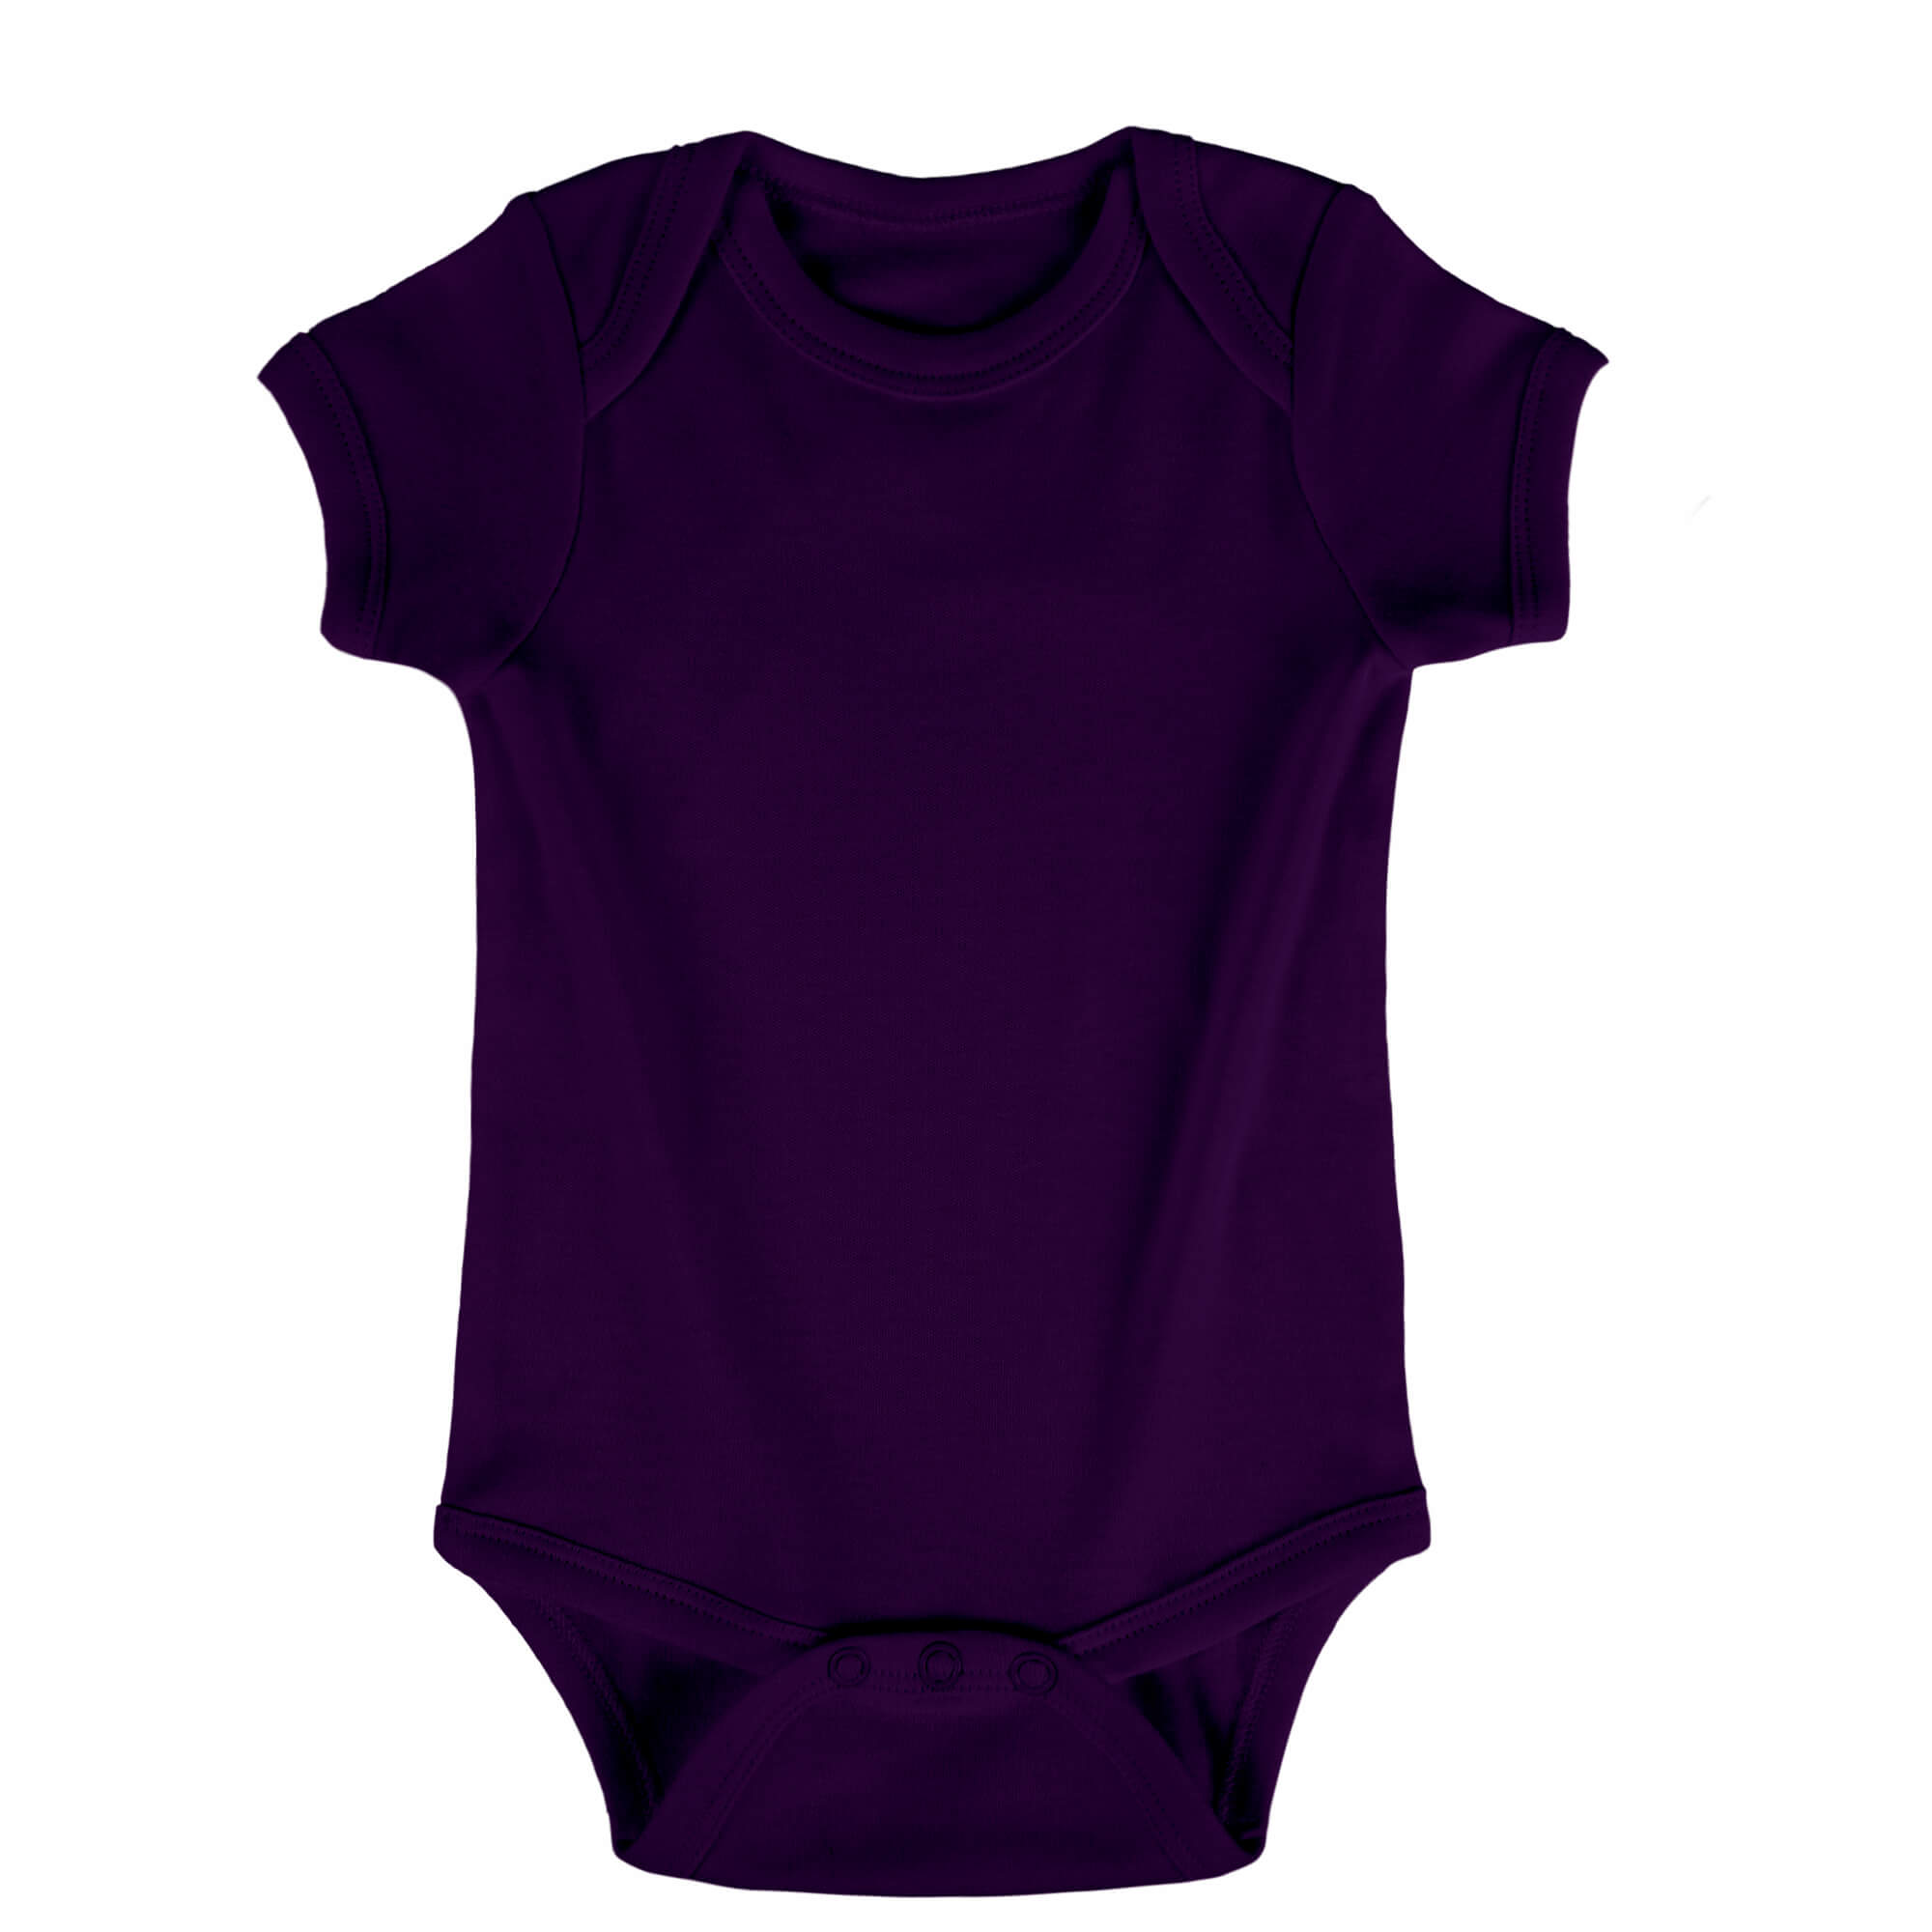 dark purple color number #51, onesie color selection, and color display.